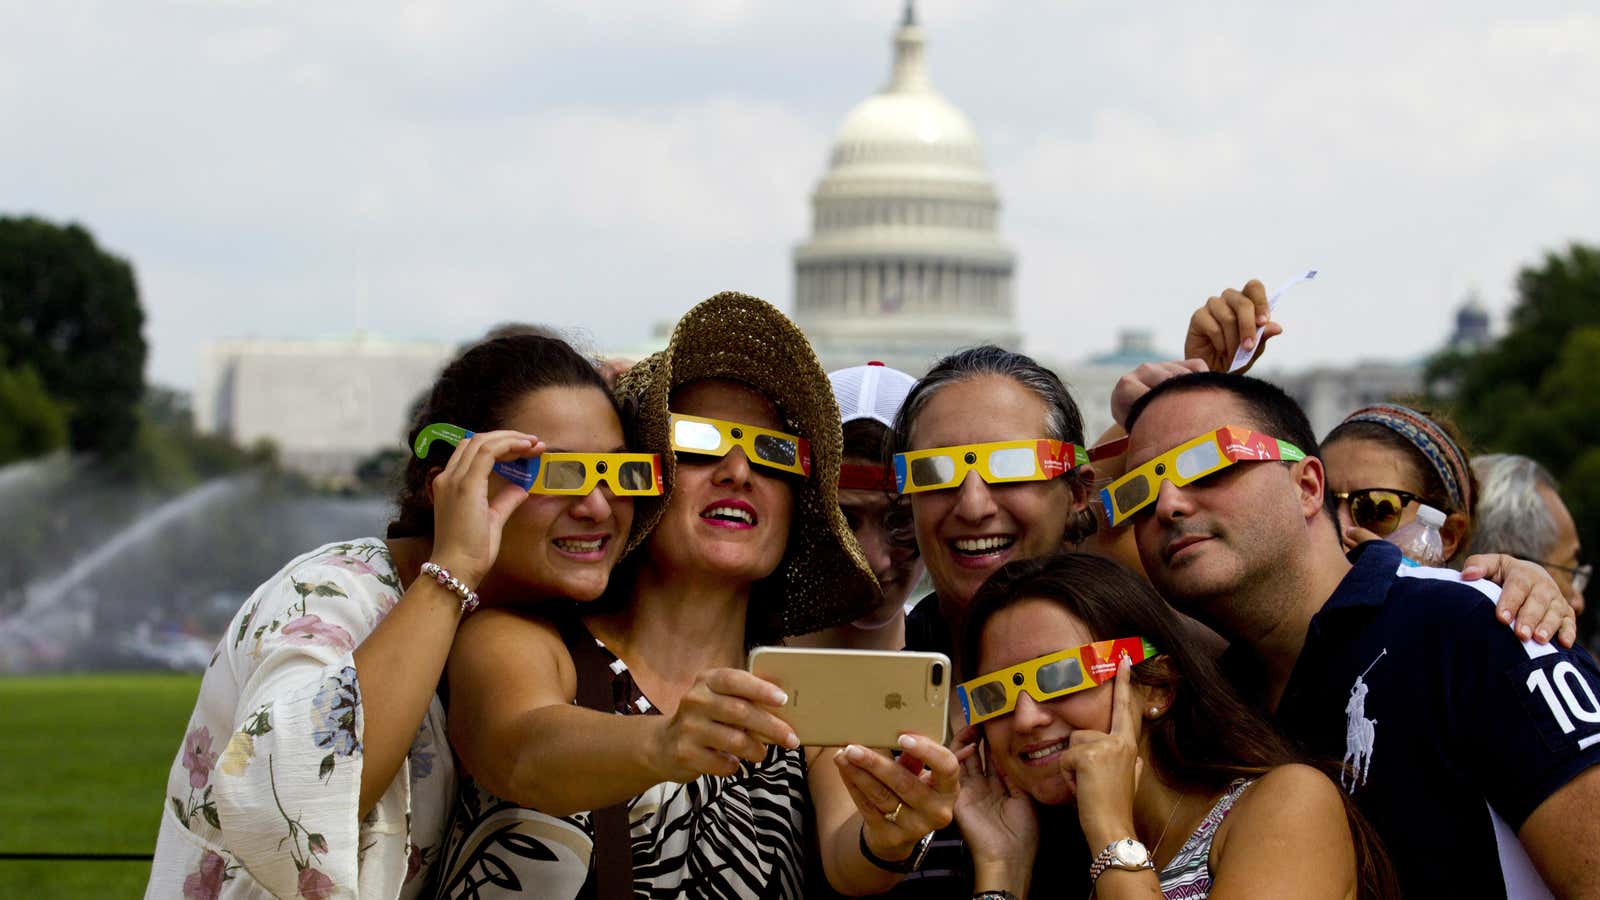 More than 66 million people took to Facebook to share their experience of the solar eclipse.